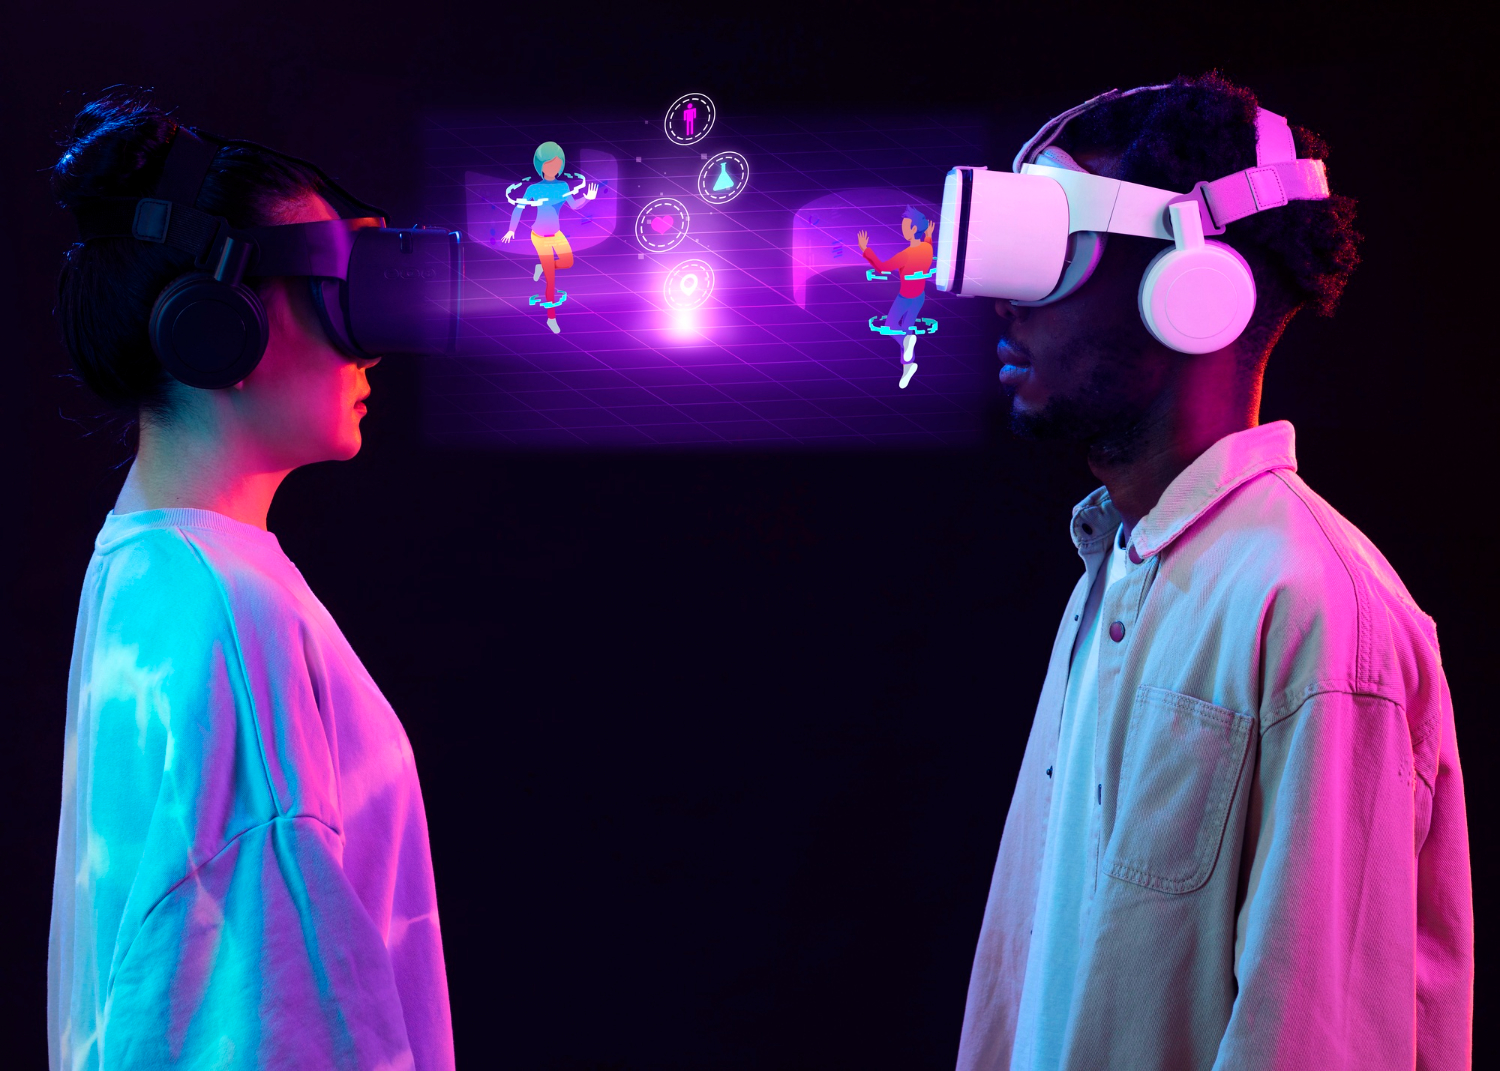 Virtual and Augmented Reality: New Opportunities in Entertainment, Education, and Business